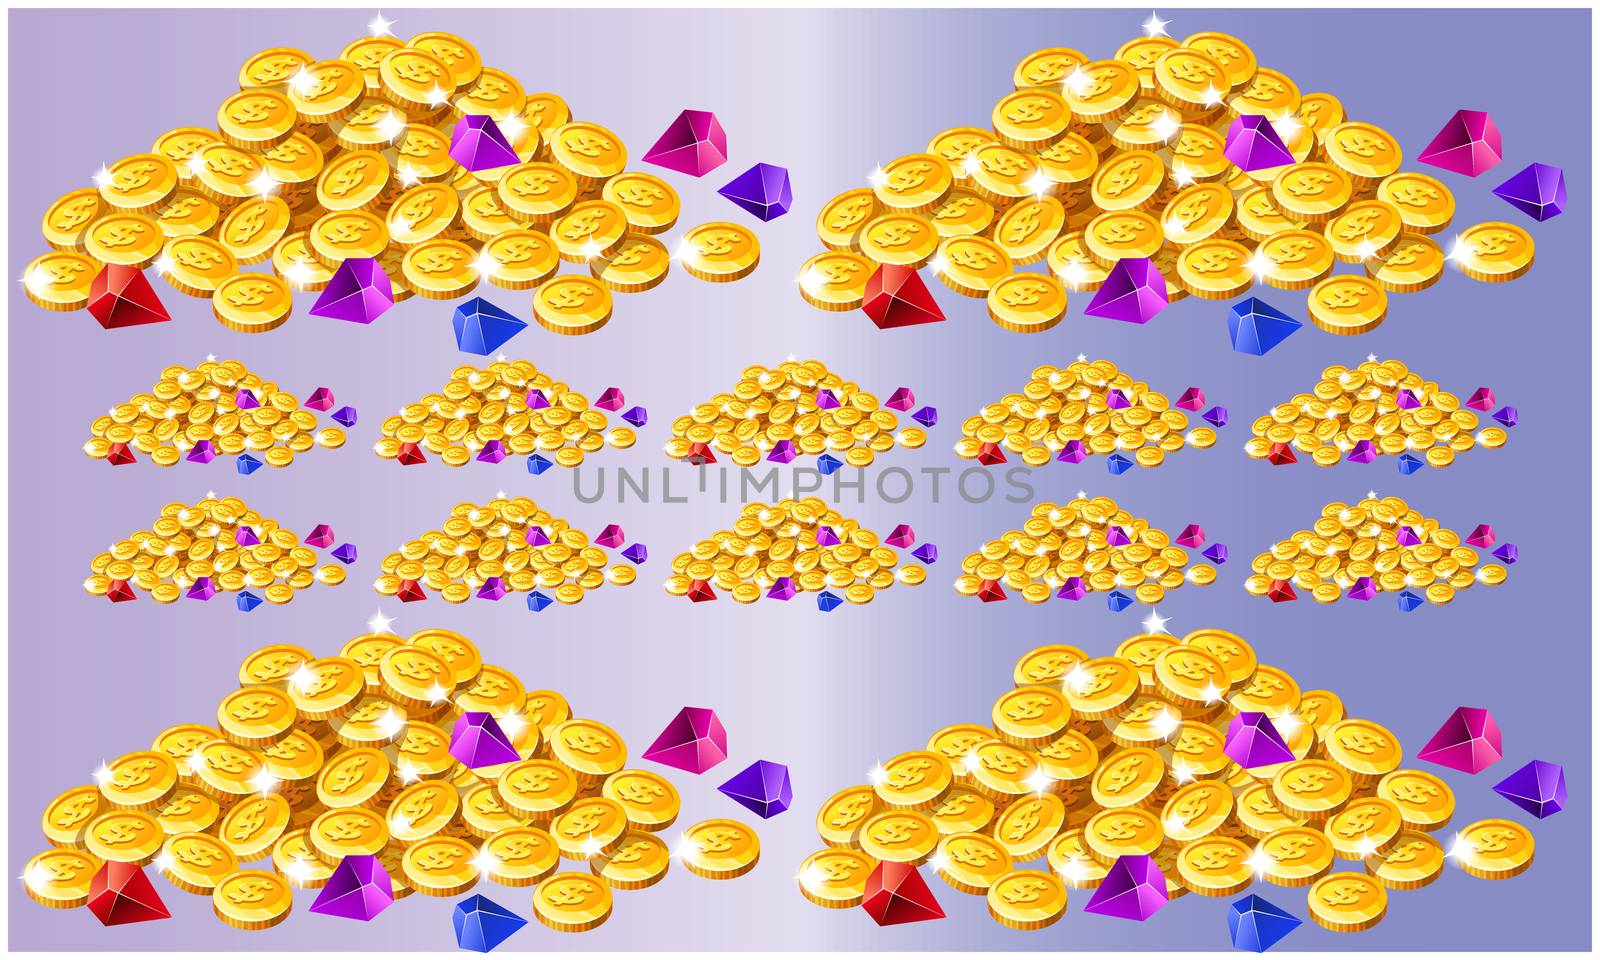 collections of coins on abstract background